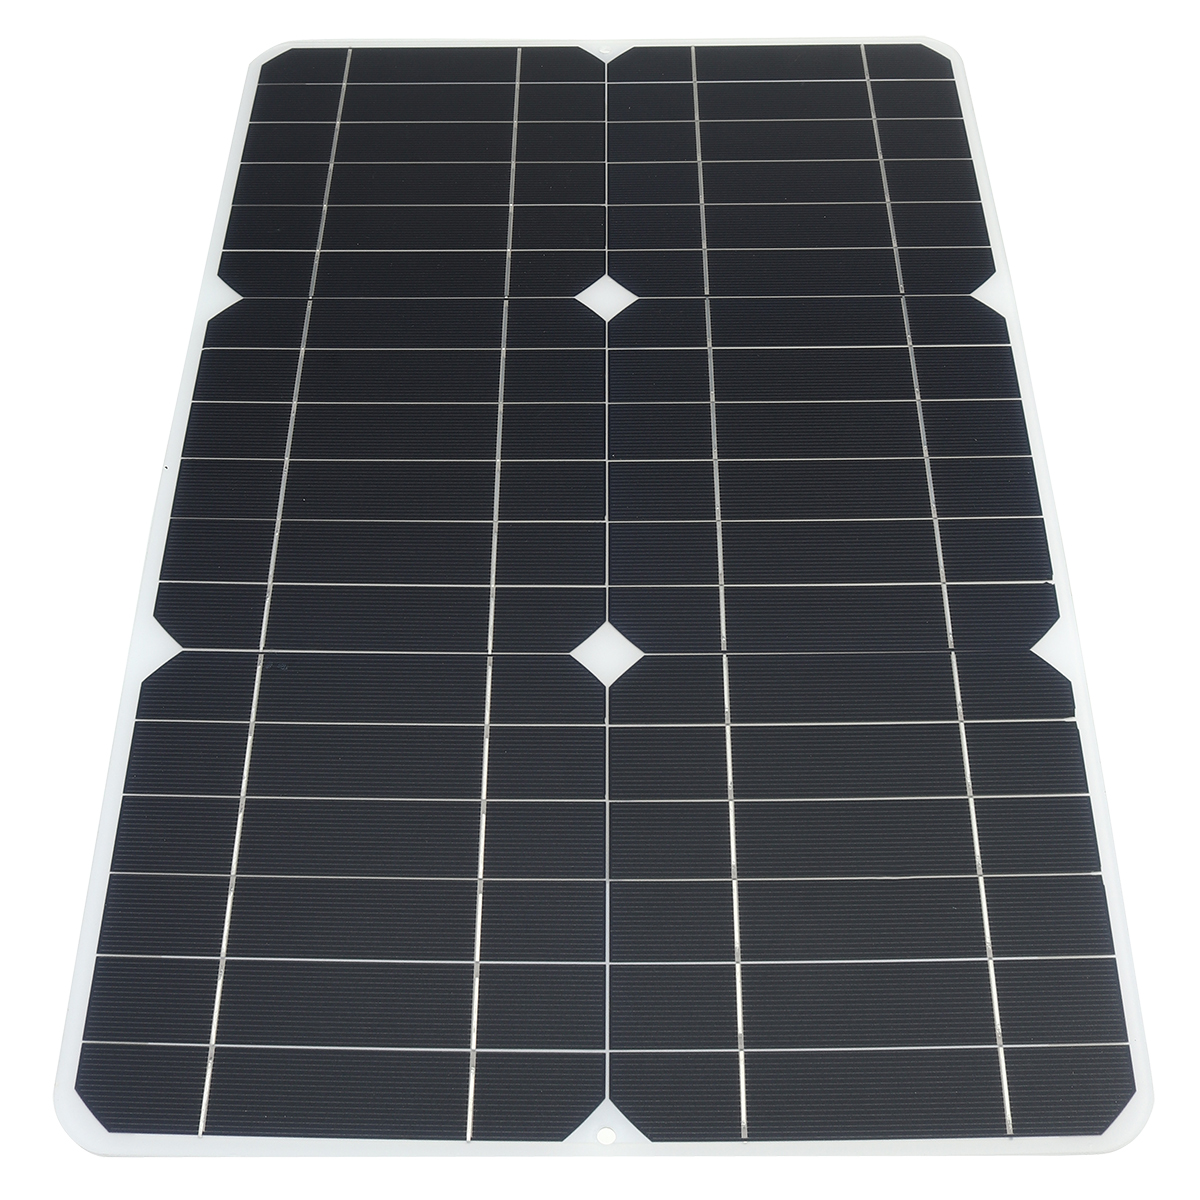 100W-18V-Solar-Panel-Monocrystalline-Silicon-Battery-Charger-Kit-for-Cycling-Climbing-Hiking-Camping-1778312-5